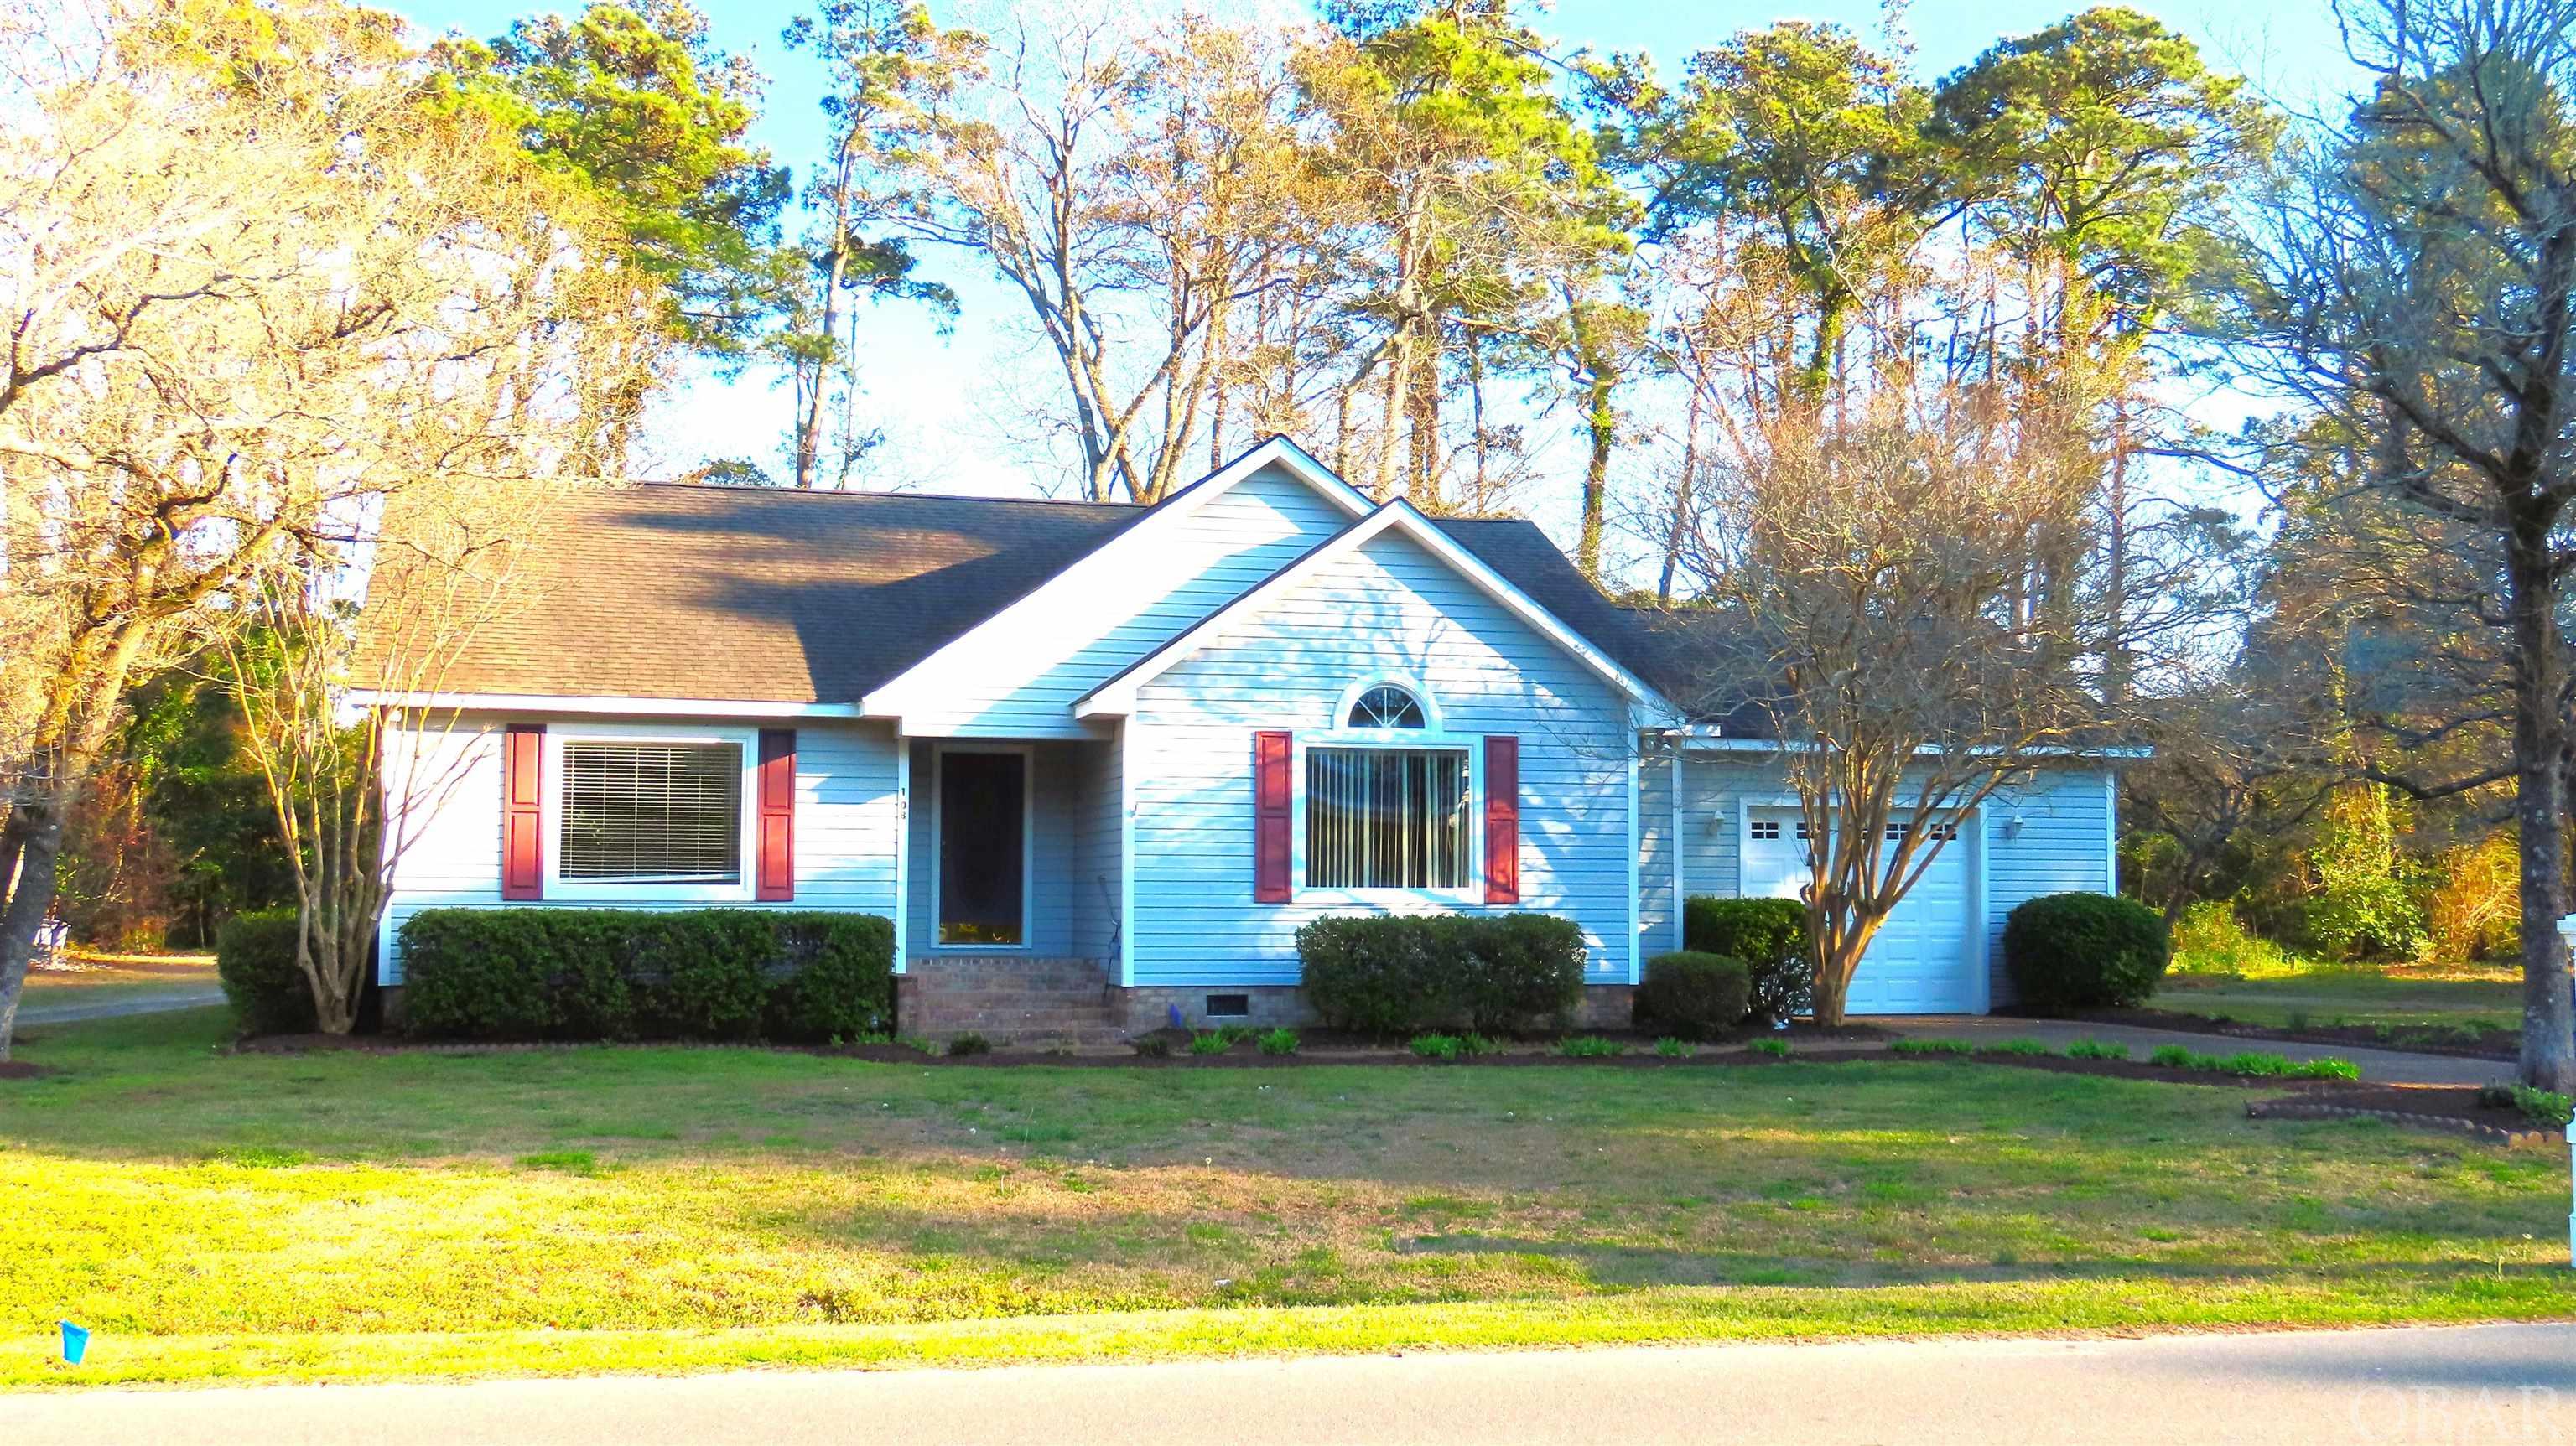 Established Roanoke Island neighborhood of Brakewood! Light-filled 3-bedroom/2-bathroom home is accessed by few stairs front & back and exudes warmth with a welcoming open floor plan accentuated by Oak Floors stretching through the foyer & hall.  MANY RECENT UPGRADES! Including ALL NEW PLUMBING PIPES! Also NEW Interior Paint (NO Popcorn!), Bath Vanities & Fixtures, Interior Doors & Hardware, Bedroom Blinds, A/C Vents, Kitchen Pulls, Appliances AND MORE. Picture windows in front rooms. Renewed vitality with newer carpets professionally cleaned, wood floors polished, ceramic tiles steam-cleaned. Outdoor enthusiasts will love the large garage with a NEW 10ft-wide door, a great two-level patio-style deck off the rear dining space, complete with protective Gutters along the roofline. Freshly tended and mulched Flower Beds grace the perimeter, adding to the home's curb appeal--now coming into bloom! Large Garden has an array of veggies. A 20x16 enclosed WORKSHOP with Power & Water, complemented by a separate 20x12 Open Shed, offers endless possibilities. With low-maintenance vinyl siding and 14-year old roof this home offers peace of mind. The Ruud exterior HVAC compressor and Rheem interior air handler, both manufactured in 2016, ensure efficient climate control, while the 2018-manufactured water heater provides ample hot water for all your needs. Don't miss the opportunity to make this gem your own!